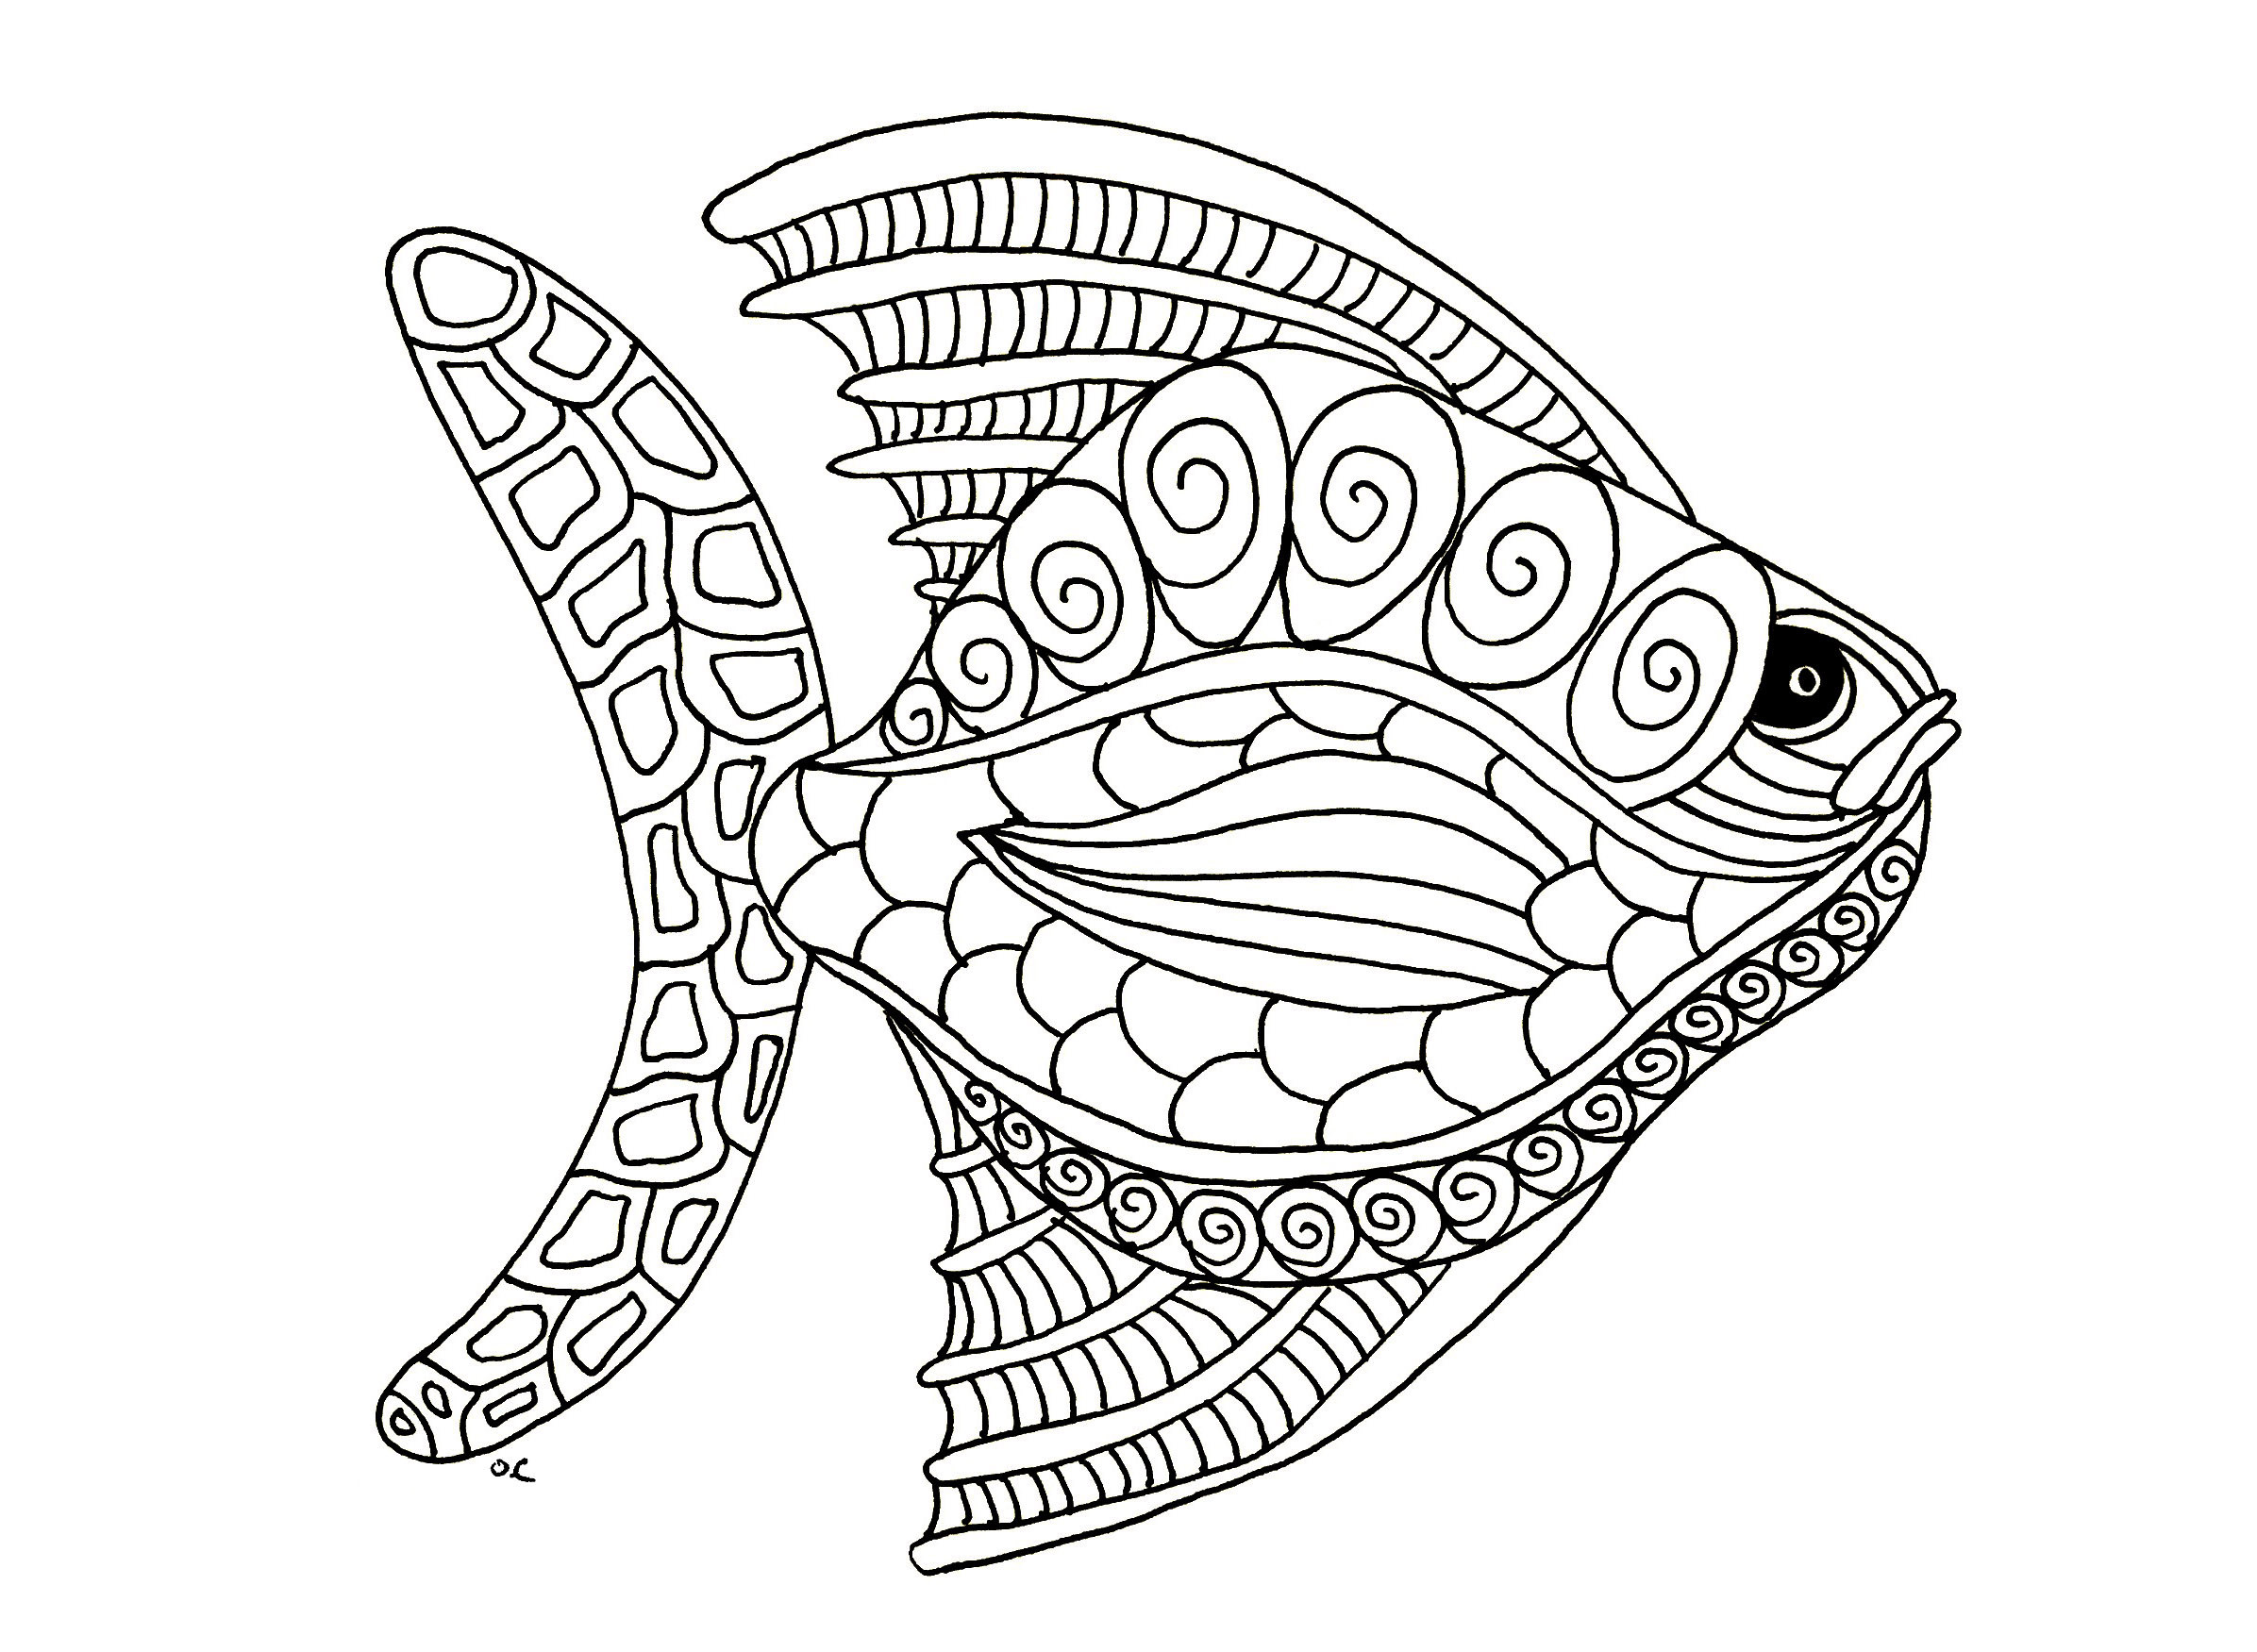 Coloring Pages For Adults Printable Animals
 Animal Coloring Pages for Adults Best Coloring Pages For